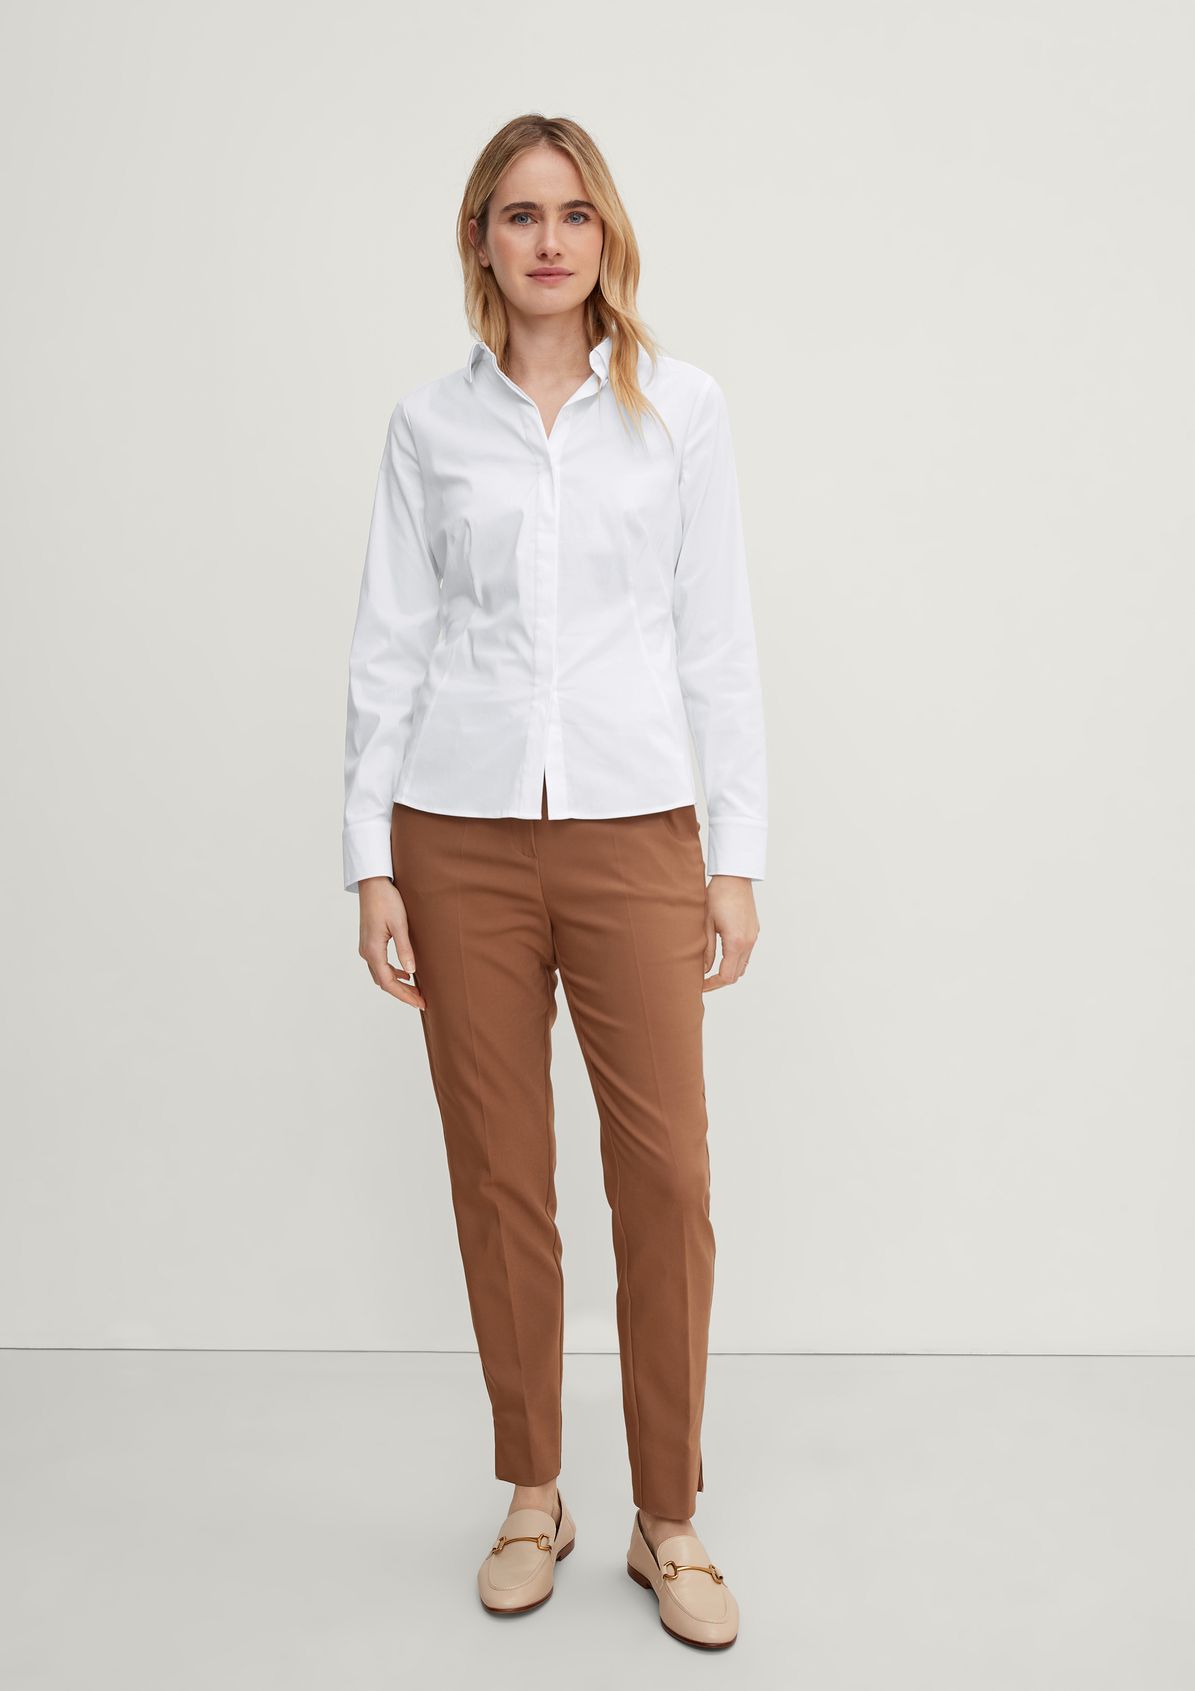 Classic cotton blend blouse from comma